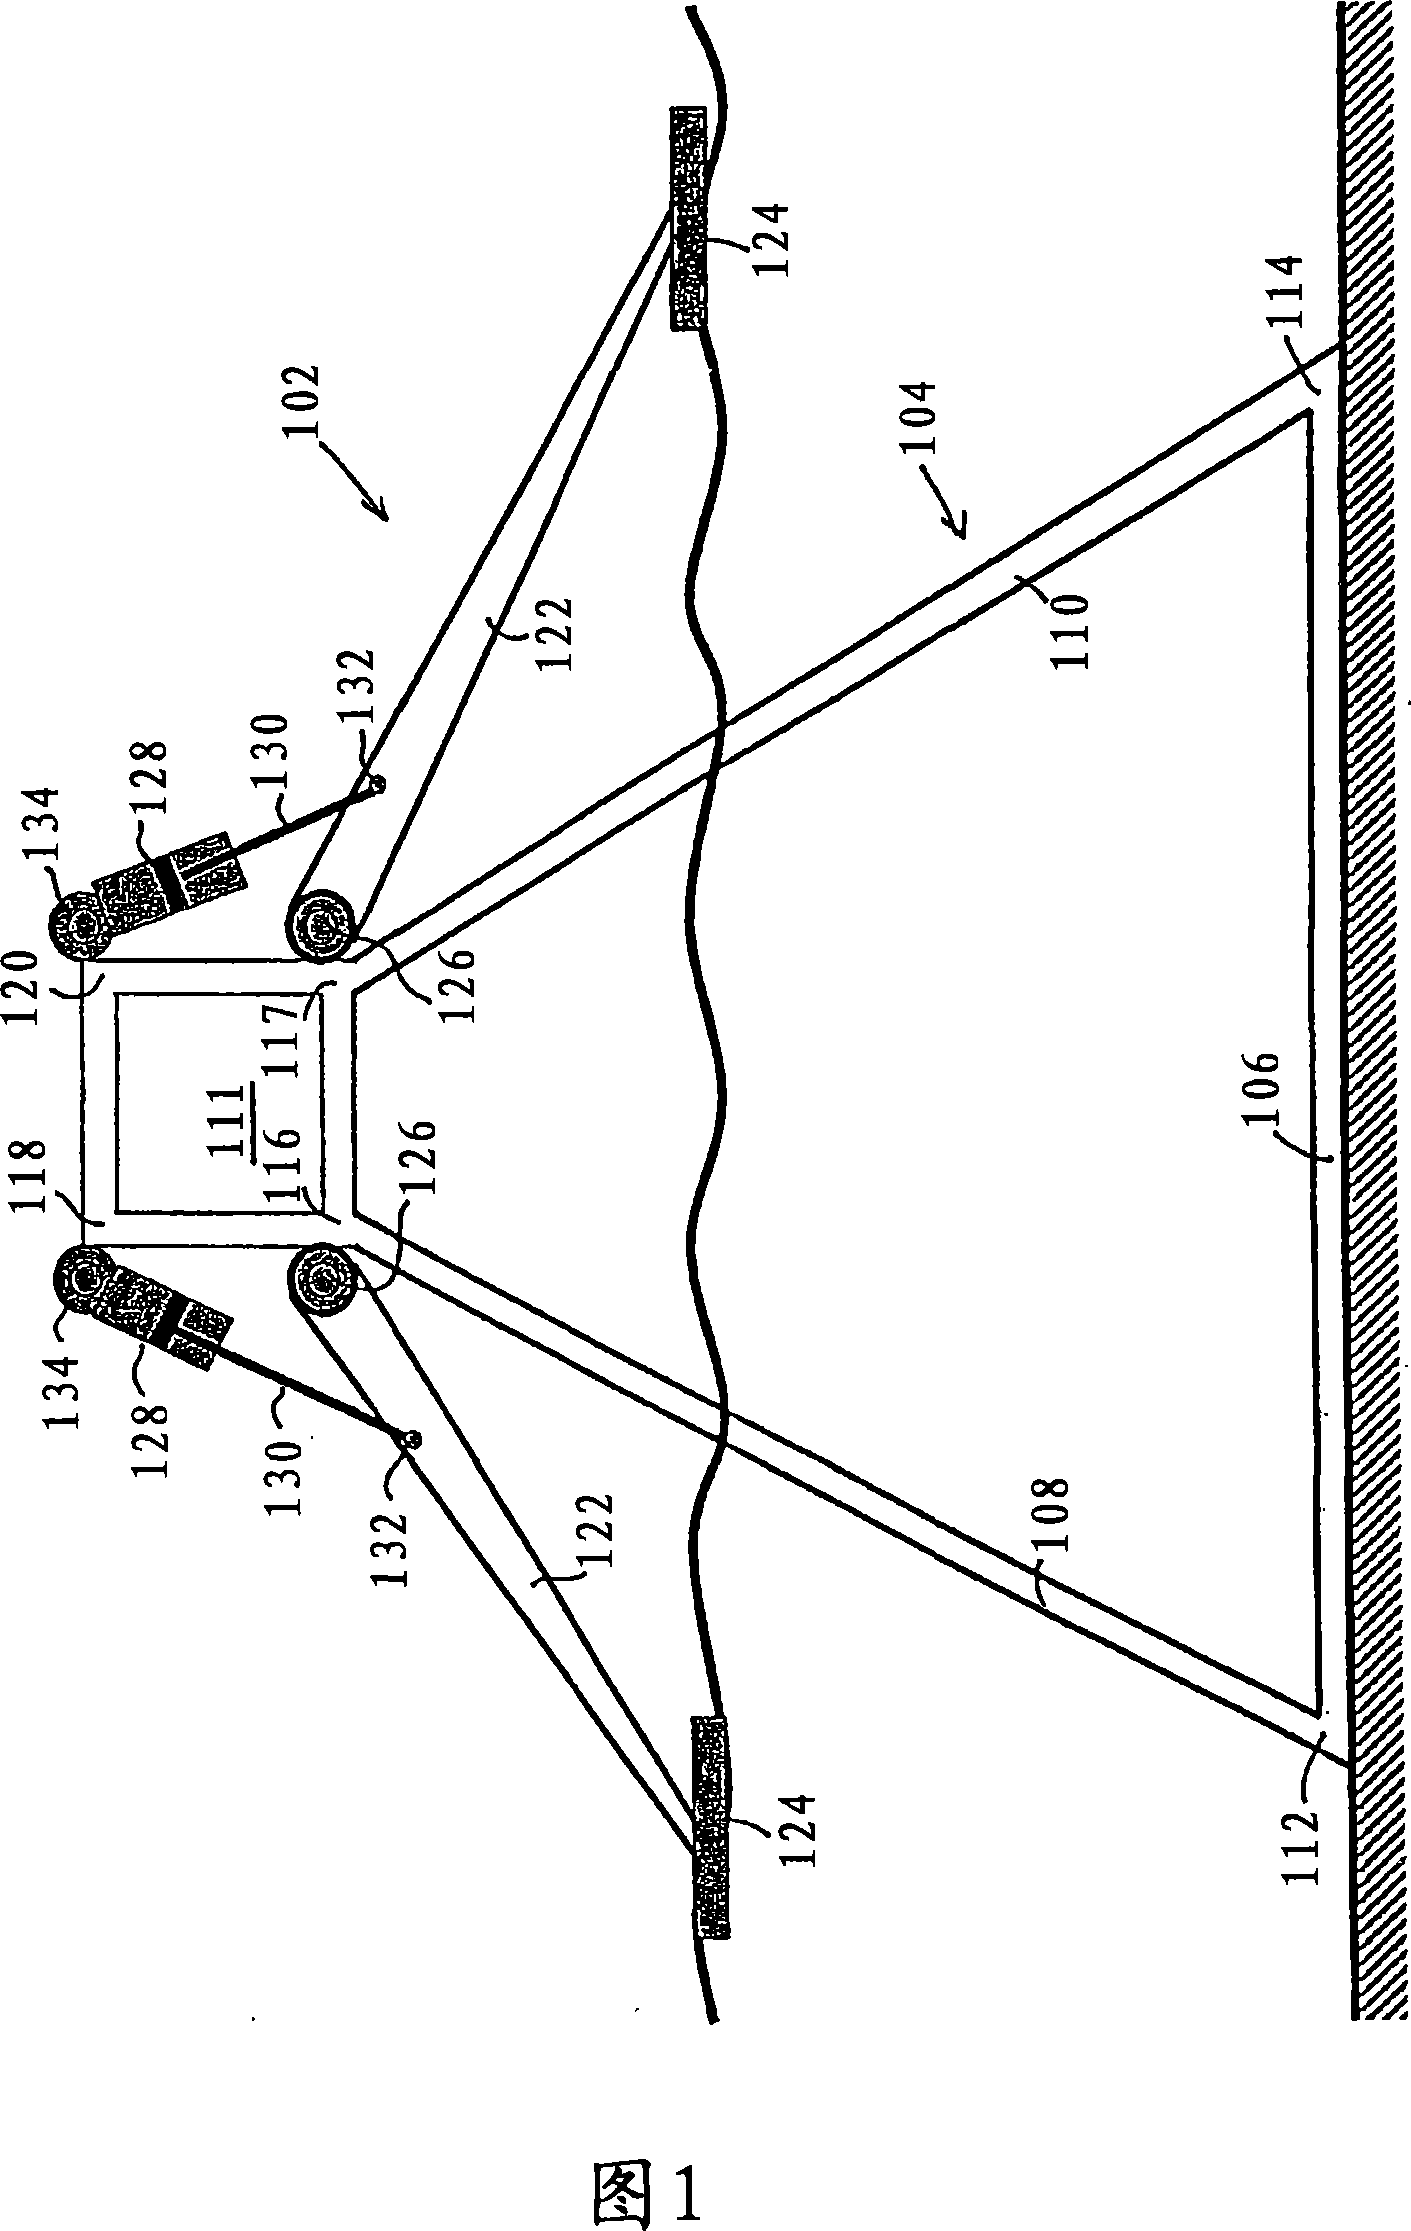 An installation comprising a wave power apparatus and a support structure therefor